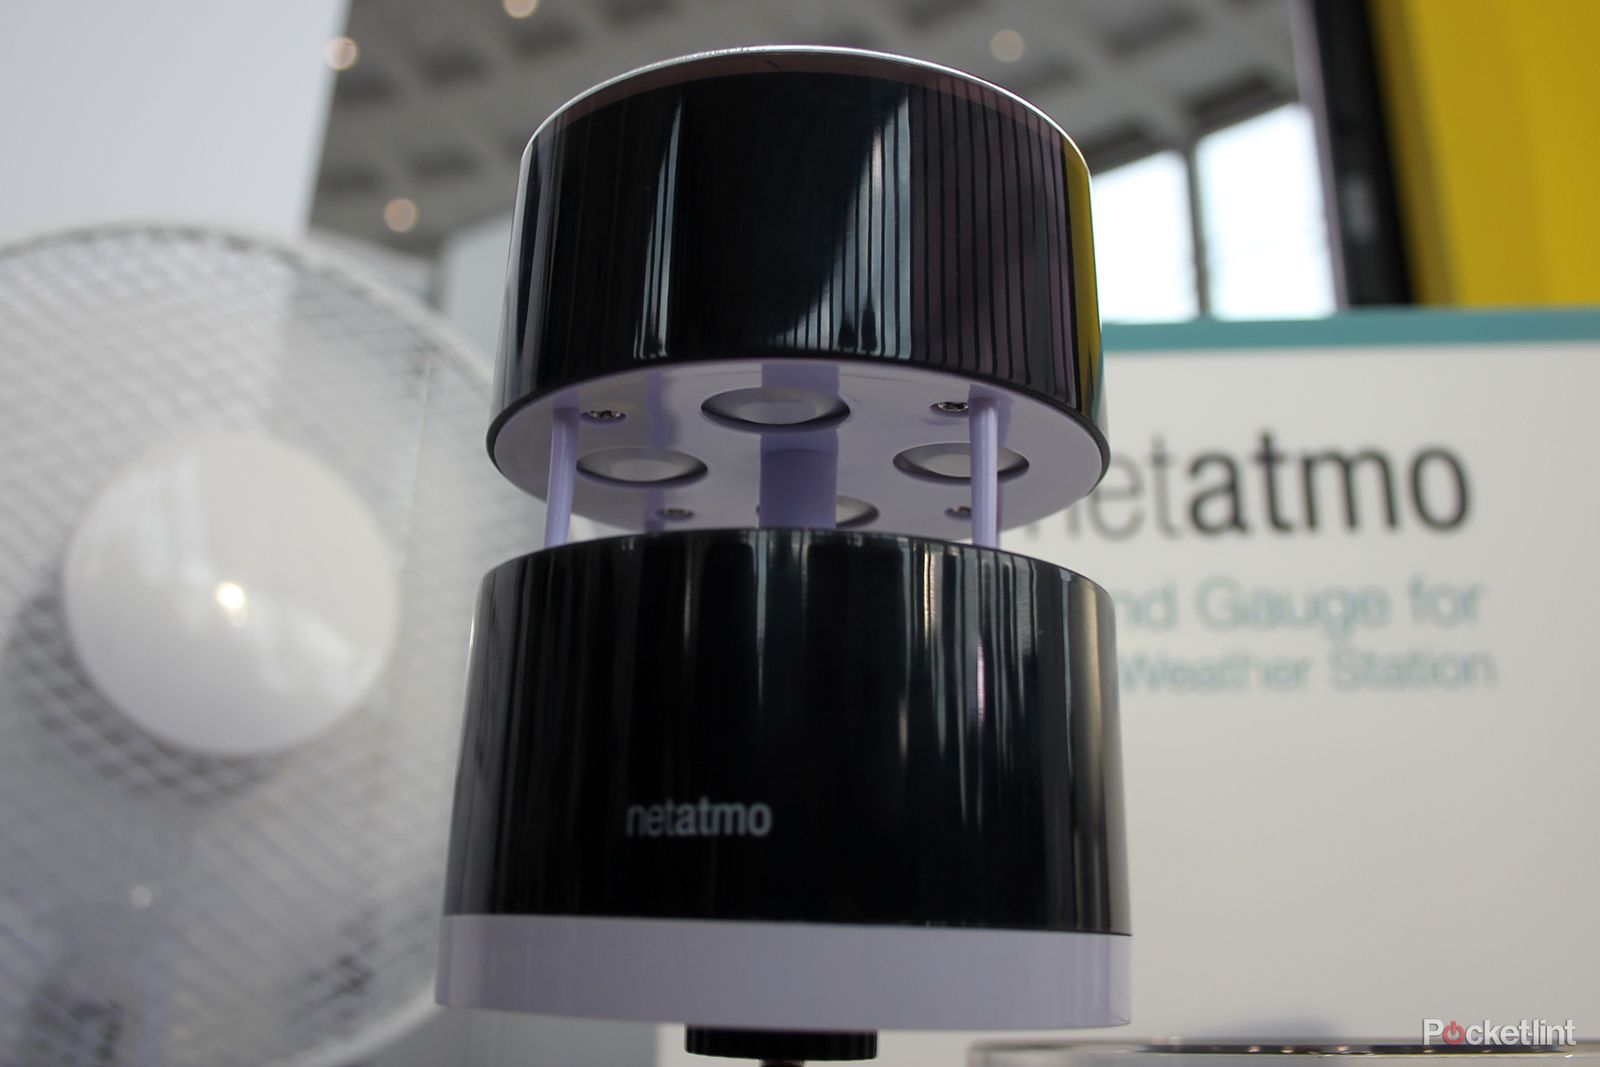 netatmo adds wind gauge to weather station for smartphone image 4